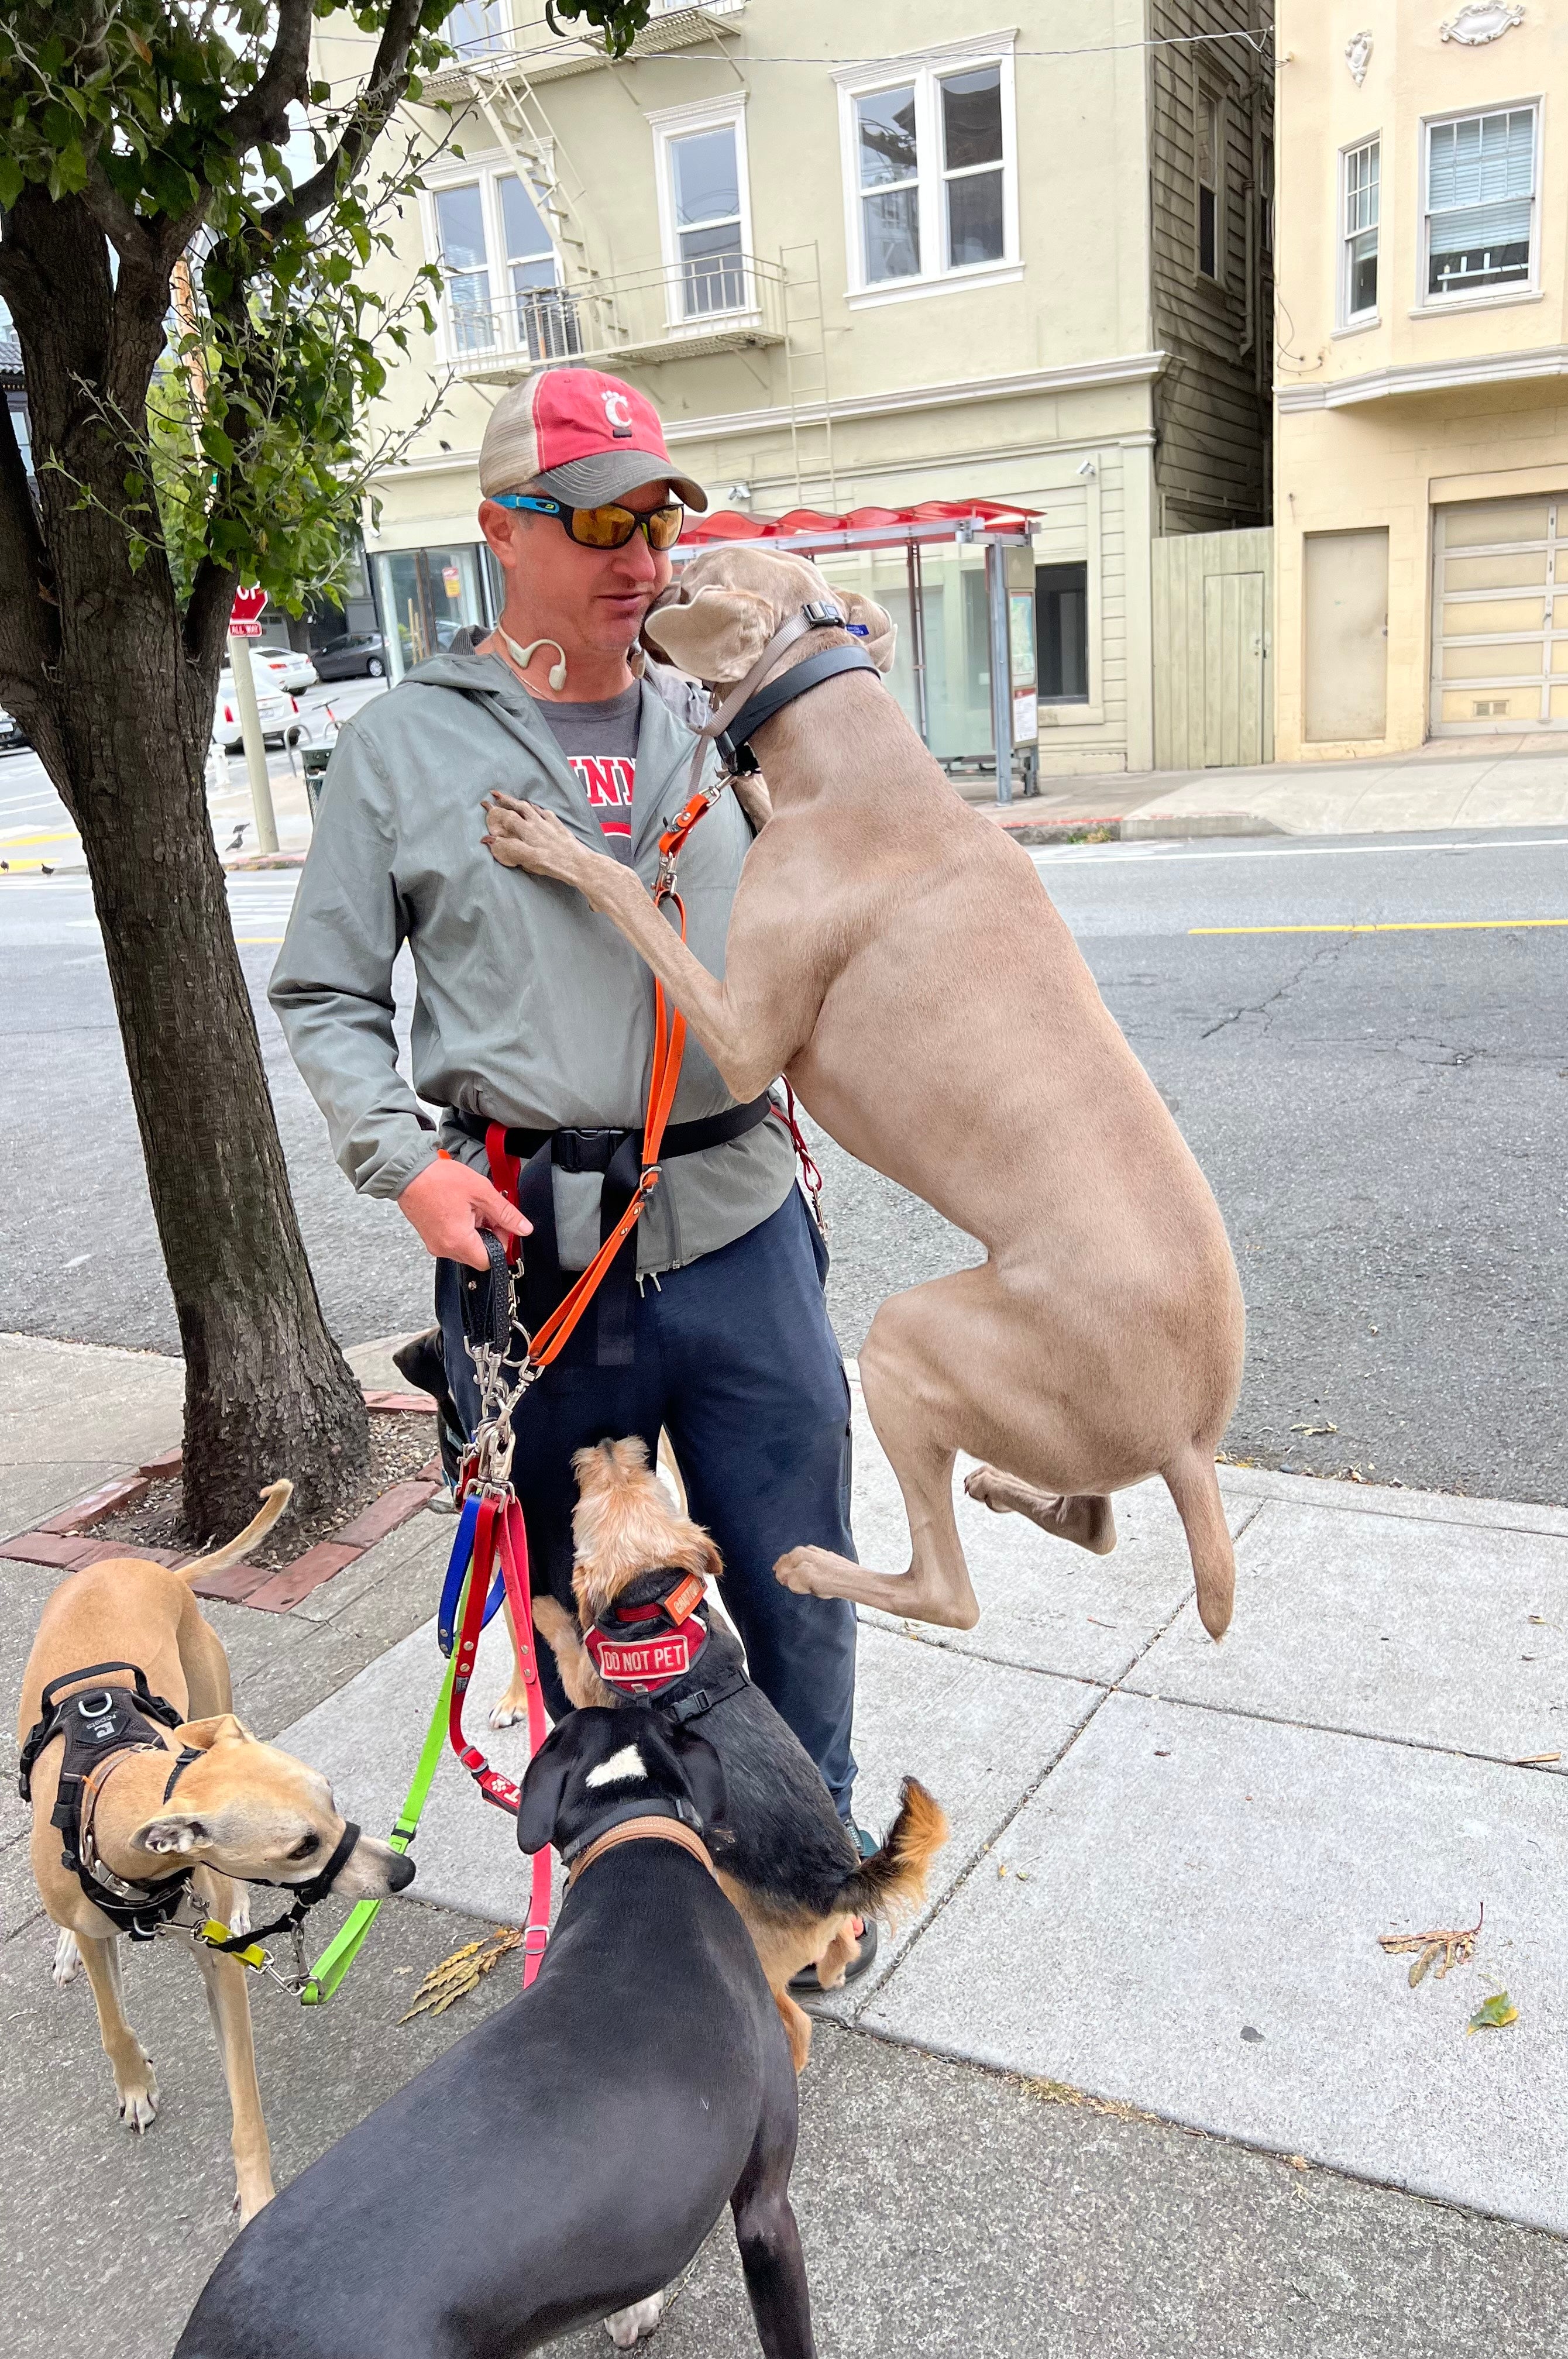 A male, Caucasian dog walker has 4 dogs leashed to his body with bright, Tinyhorse equipment. Two of the dogs are jumping up on the dog walker.